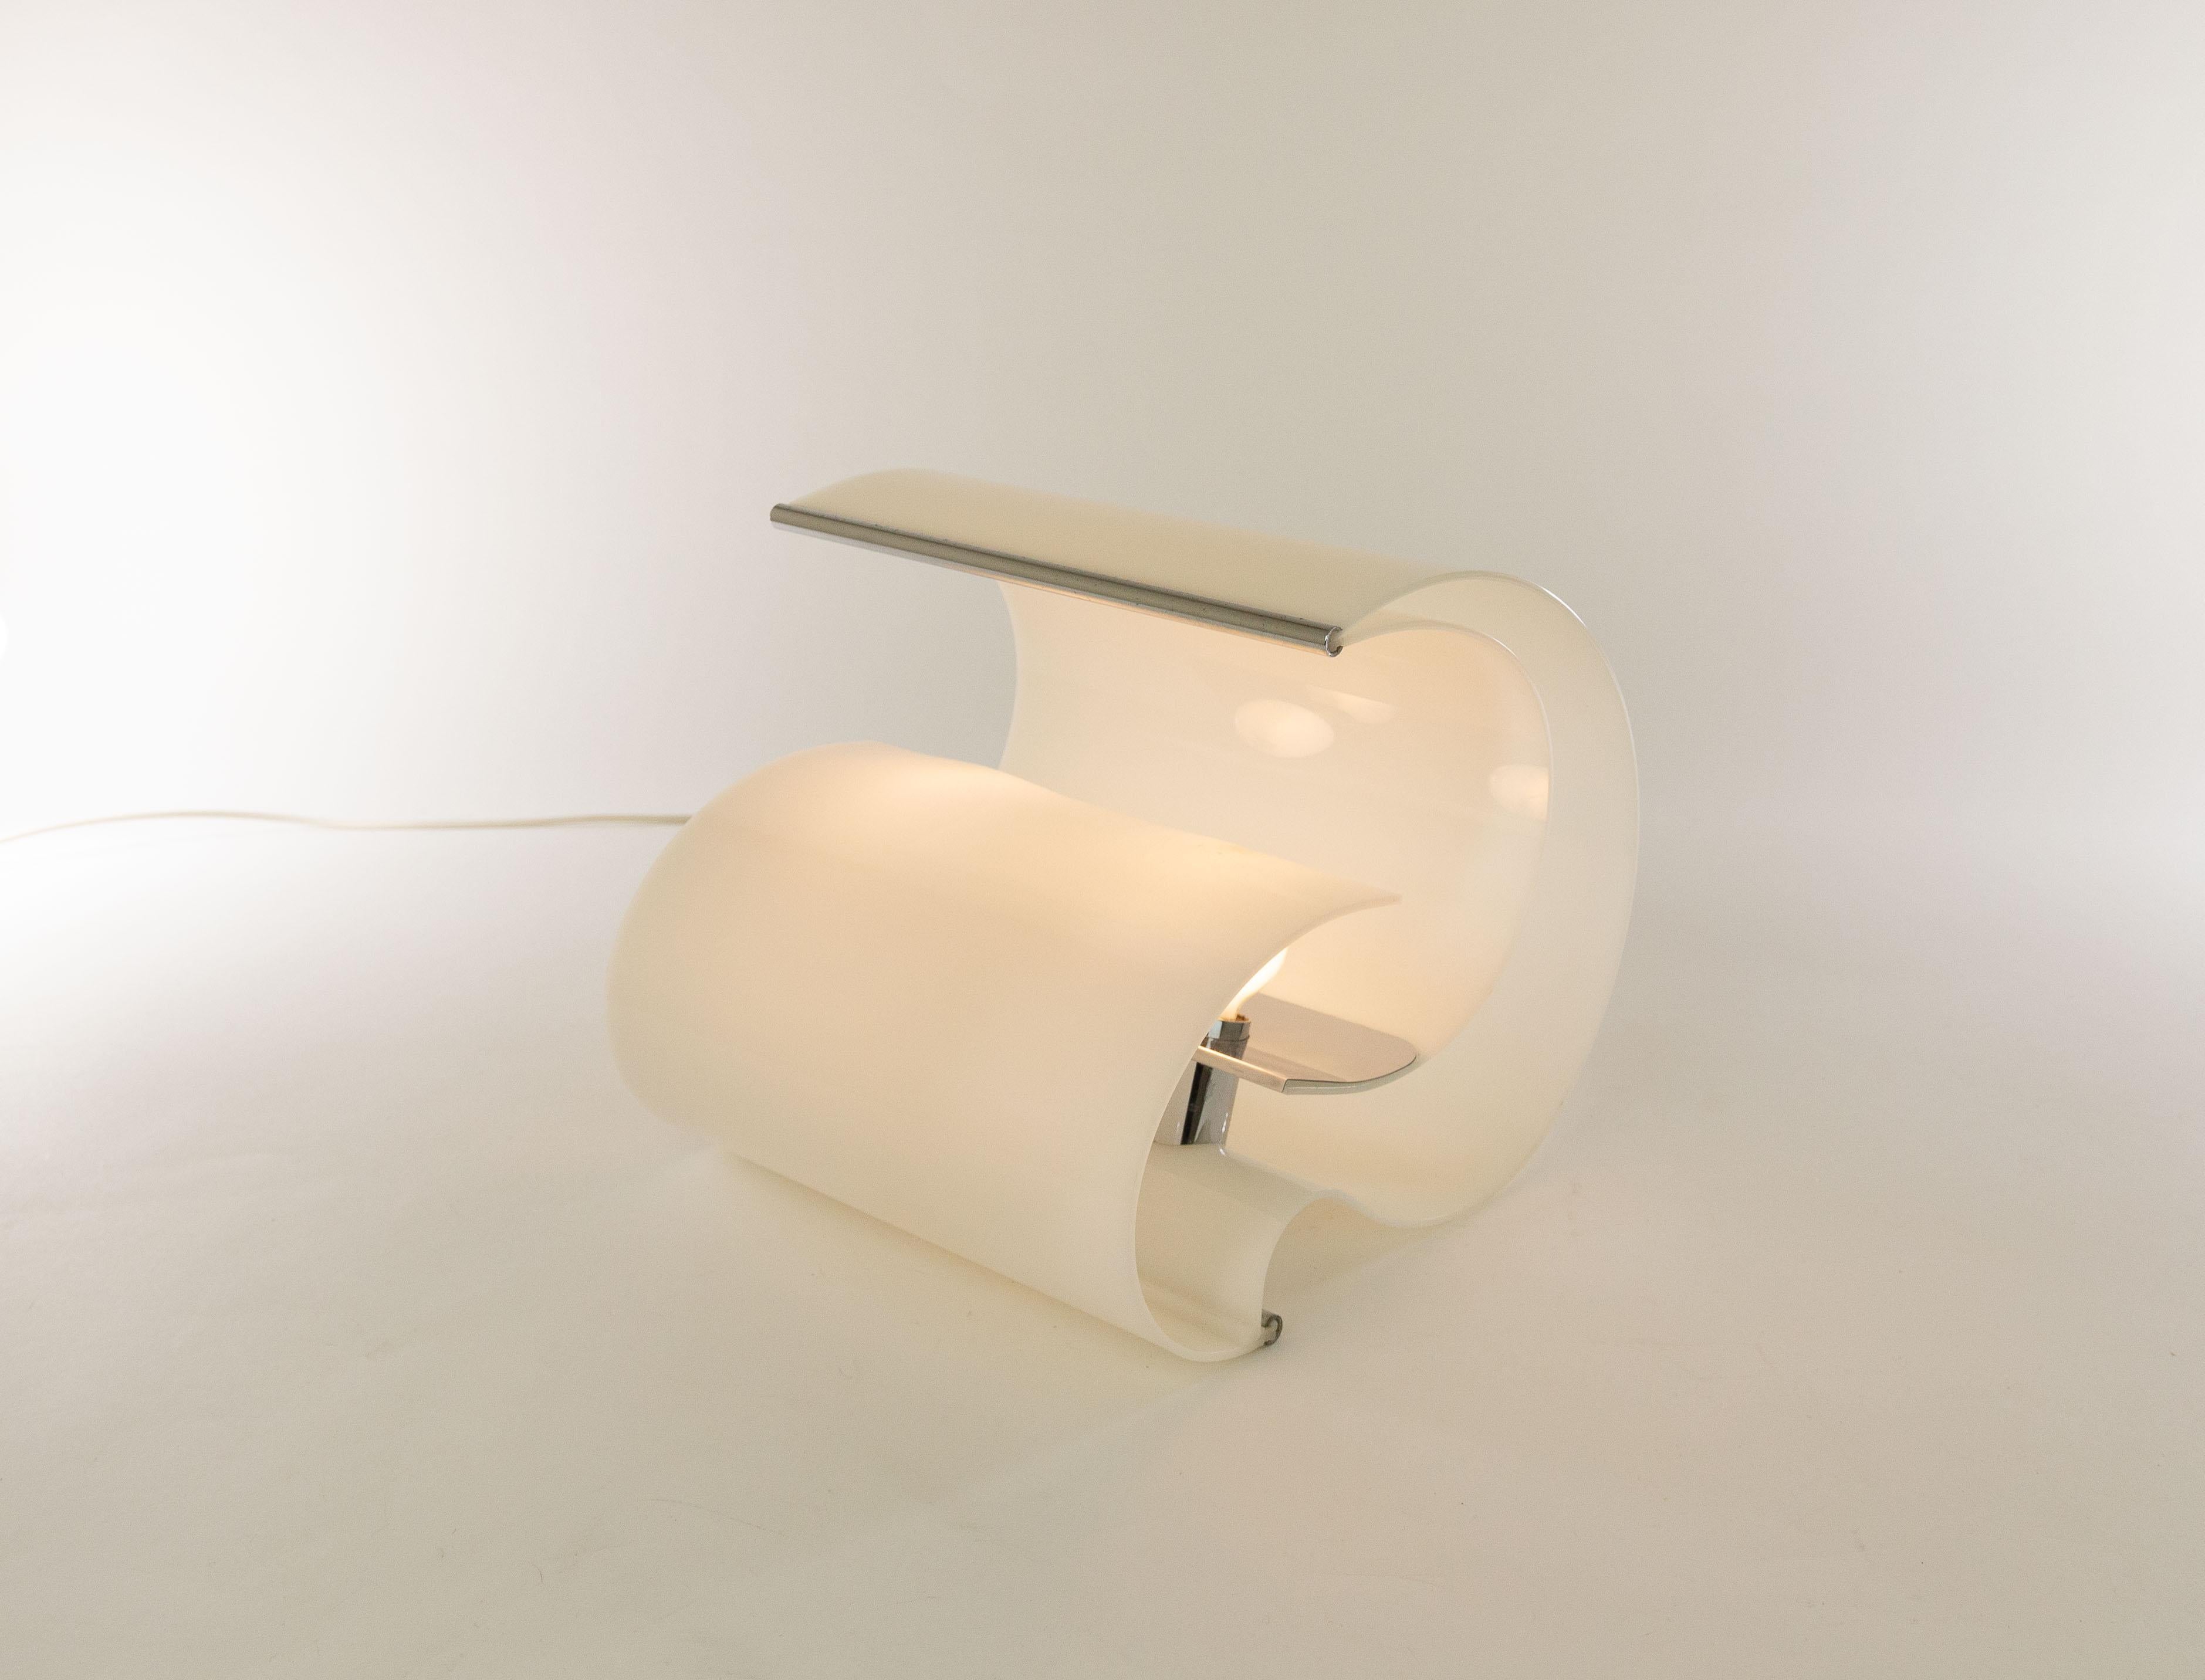 Model 8105 table lamp designed by Franco Mazzucchelli Tartaglino in 1969 and produced by Stilnovo.

Franco Mazzucchelli Tartaglino is famous for his inflatable plastic furniture. For this lamp he also used his favorite material, plastic, in